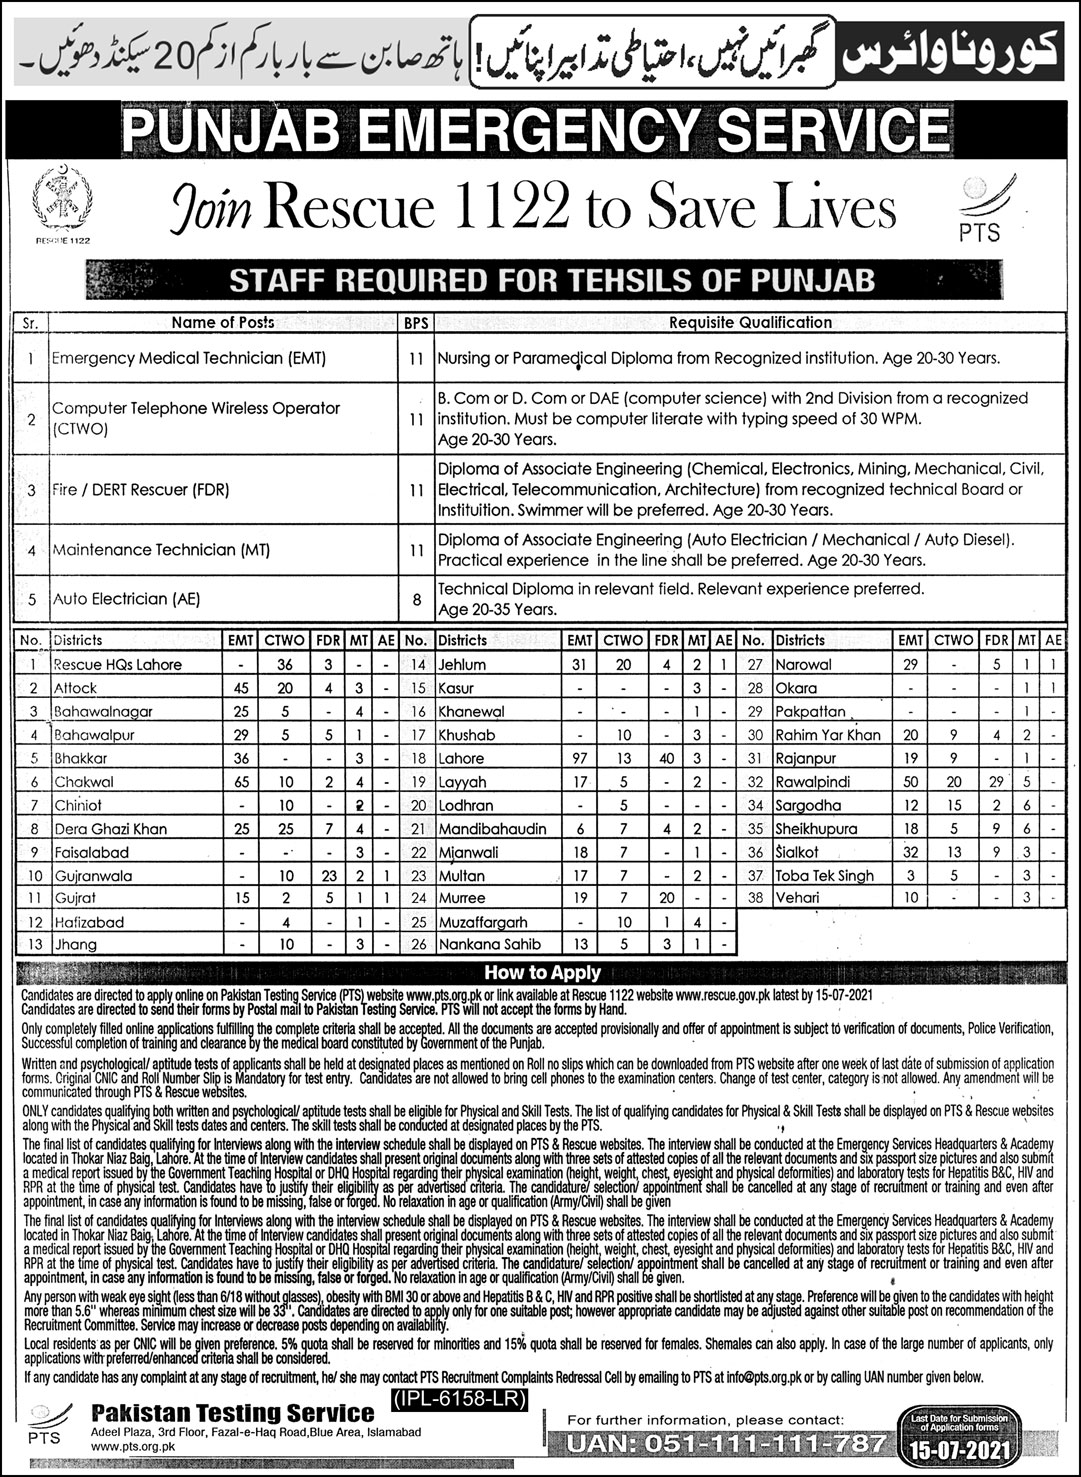 Latest Government Jobs in Rescue 1122 for the posts of EMT, CTWO, Fire Rescuer, MT, etc. in Punjab by PTS in June 2021